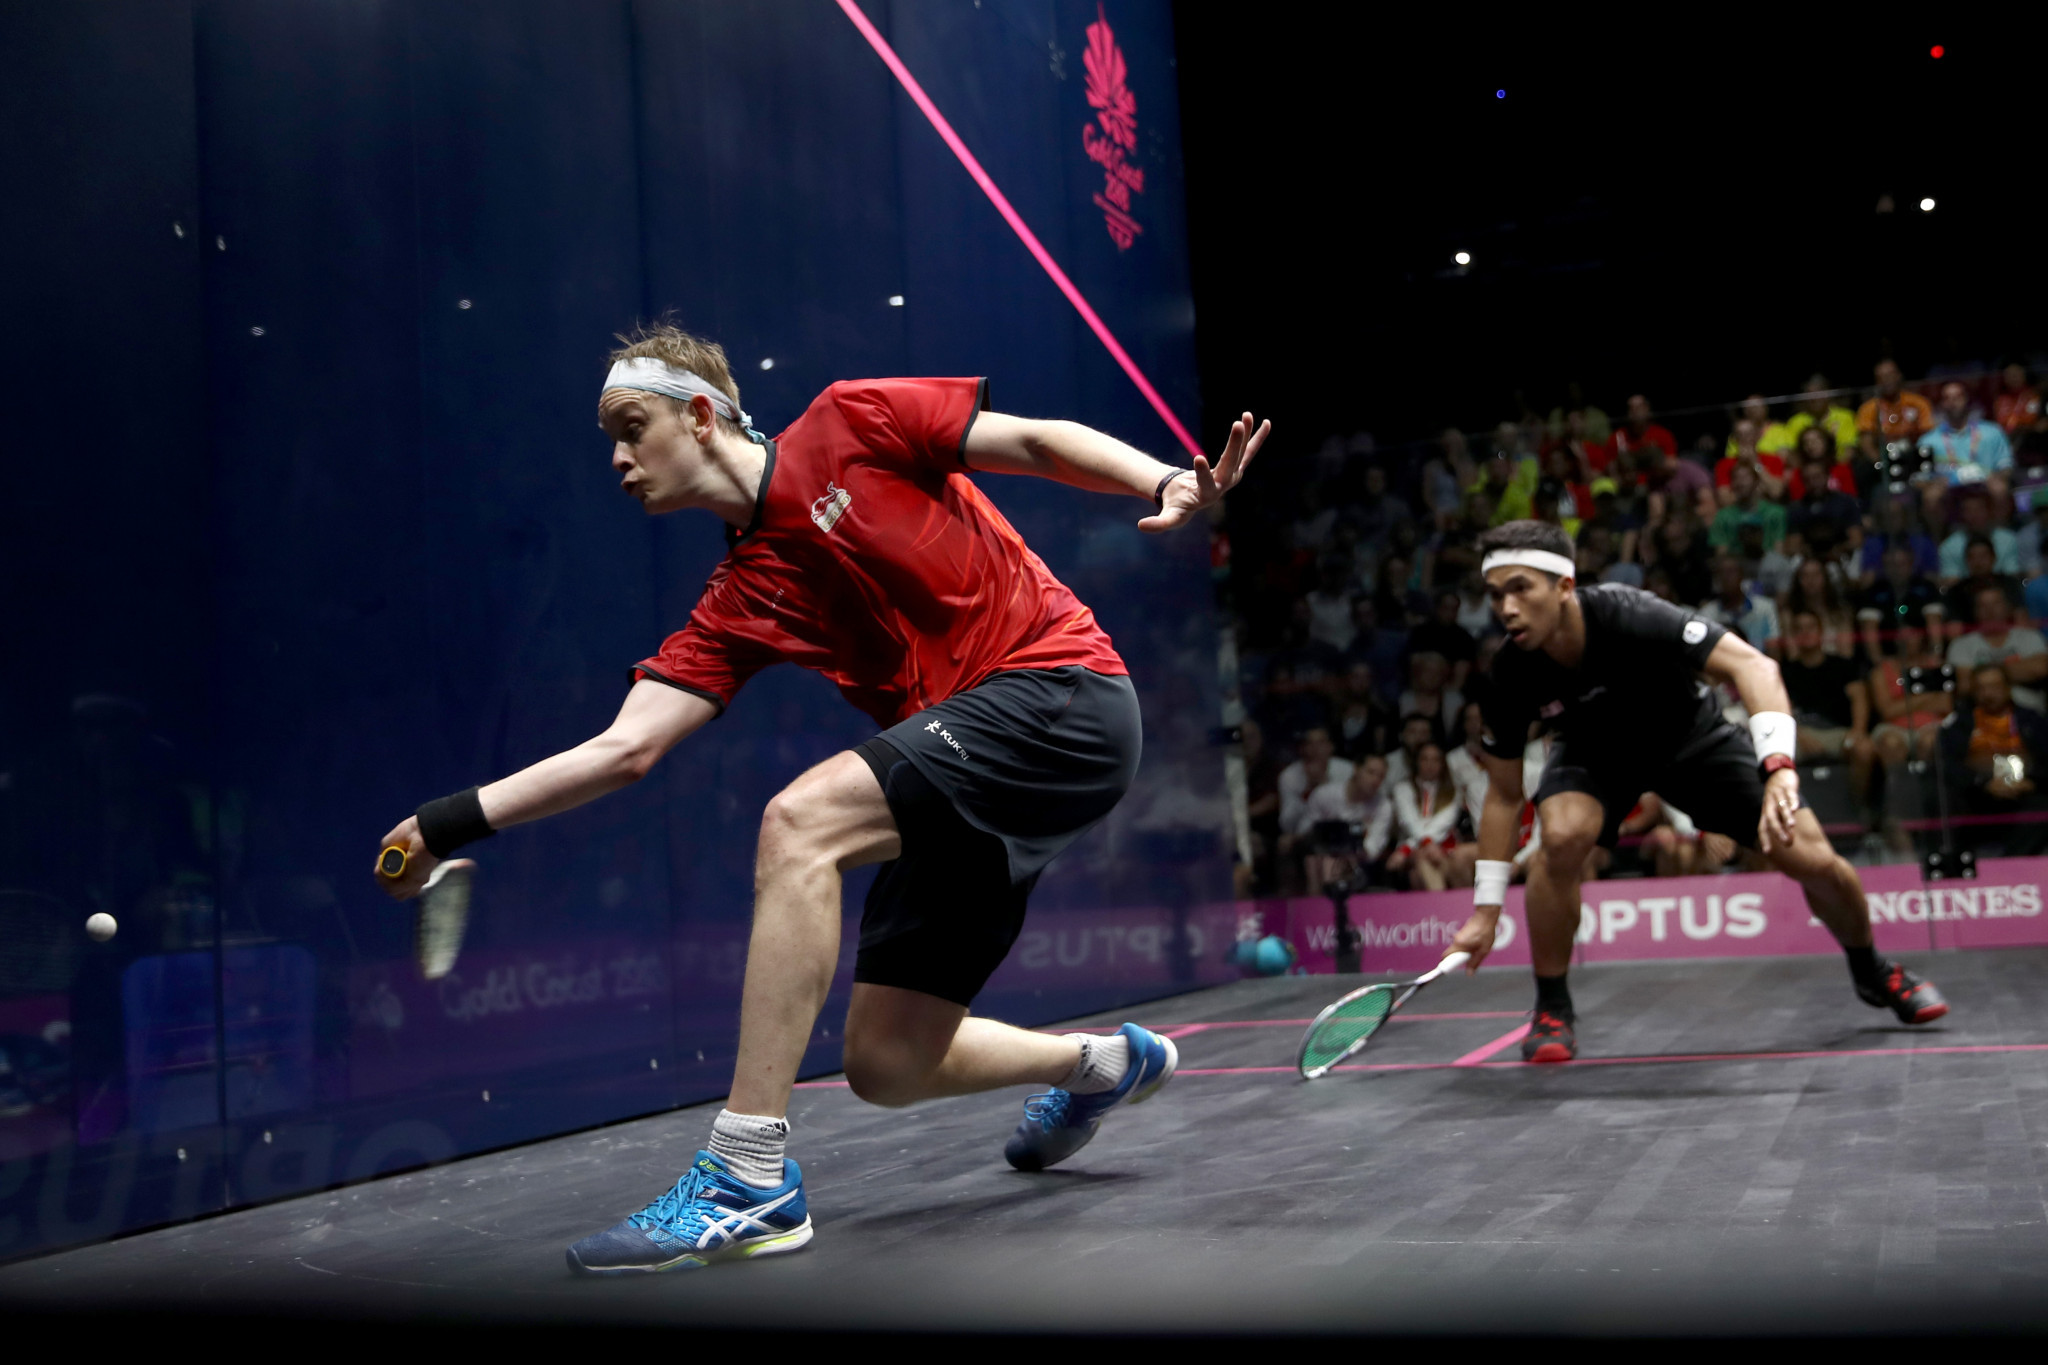 Squash is the world's most physically demanding racket sport, data has claimed ©Getty Images